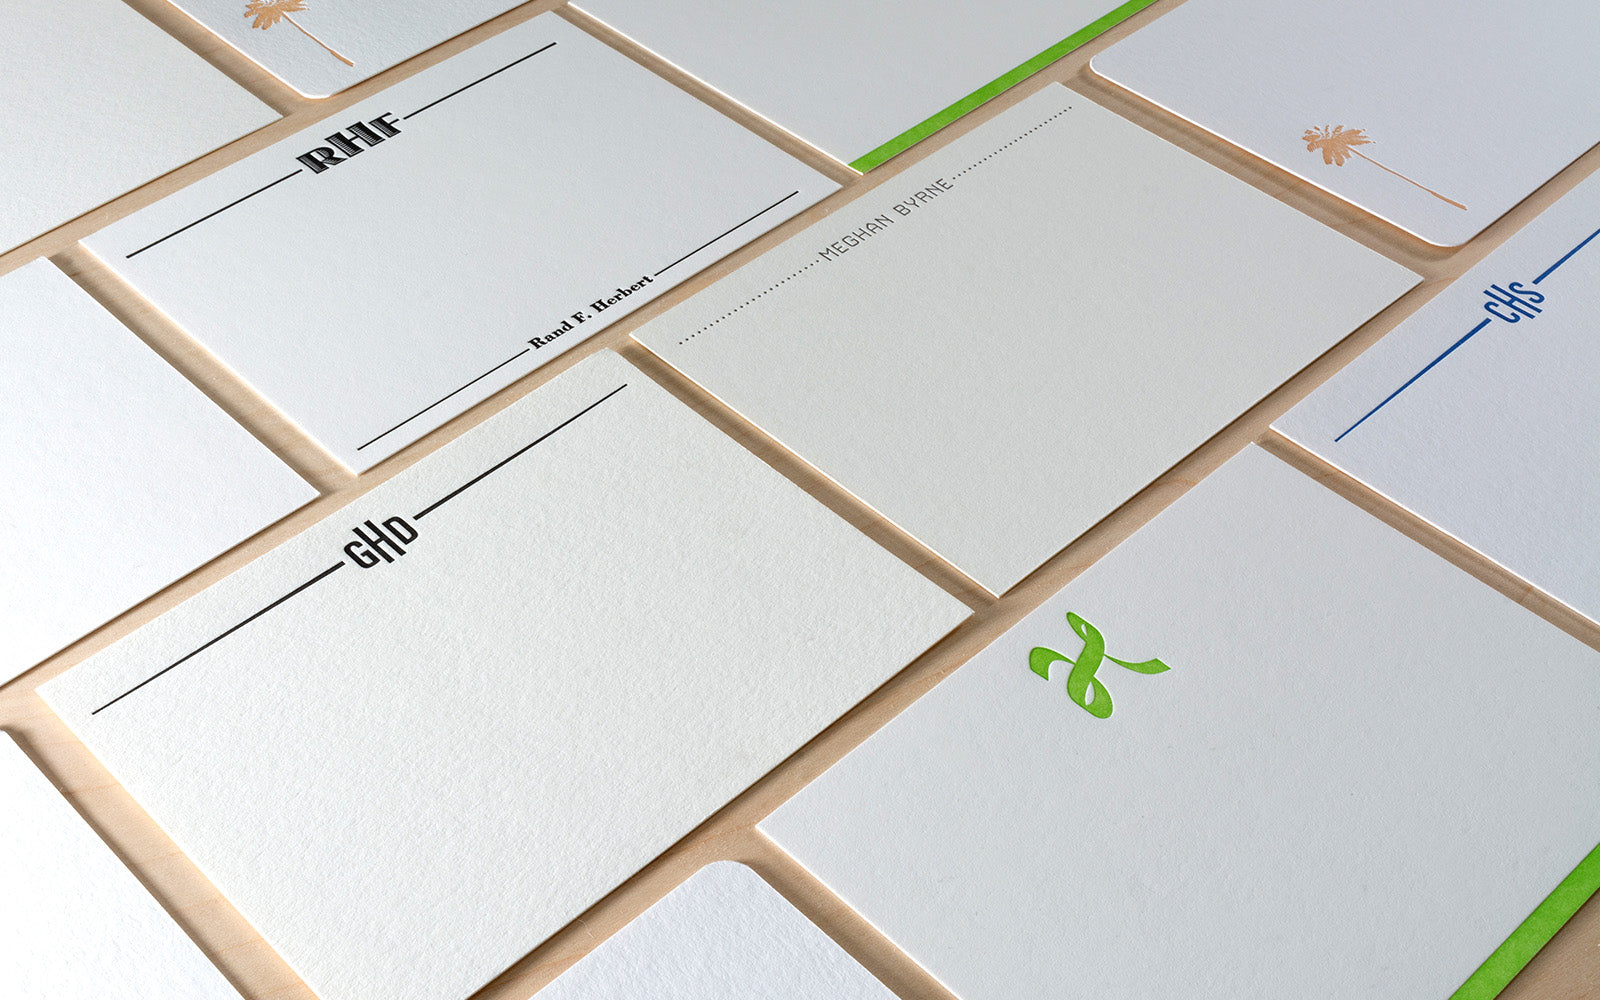 Angled grid of letterpress printed custom notecards in different colors and styles.